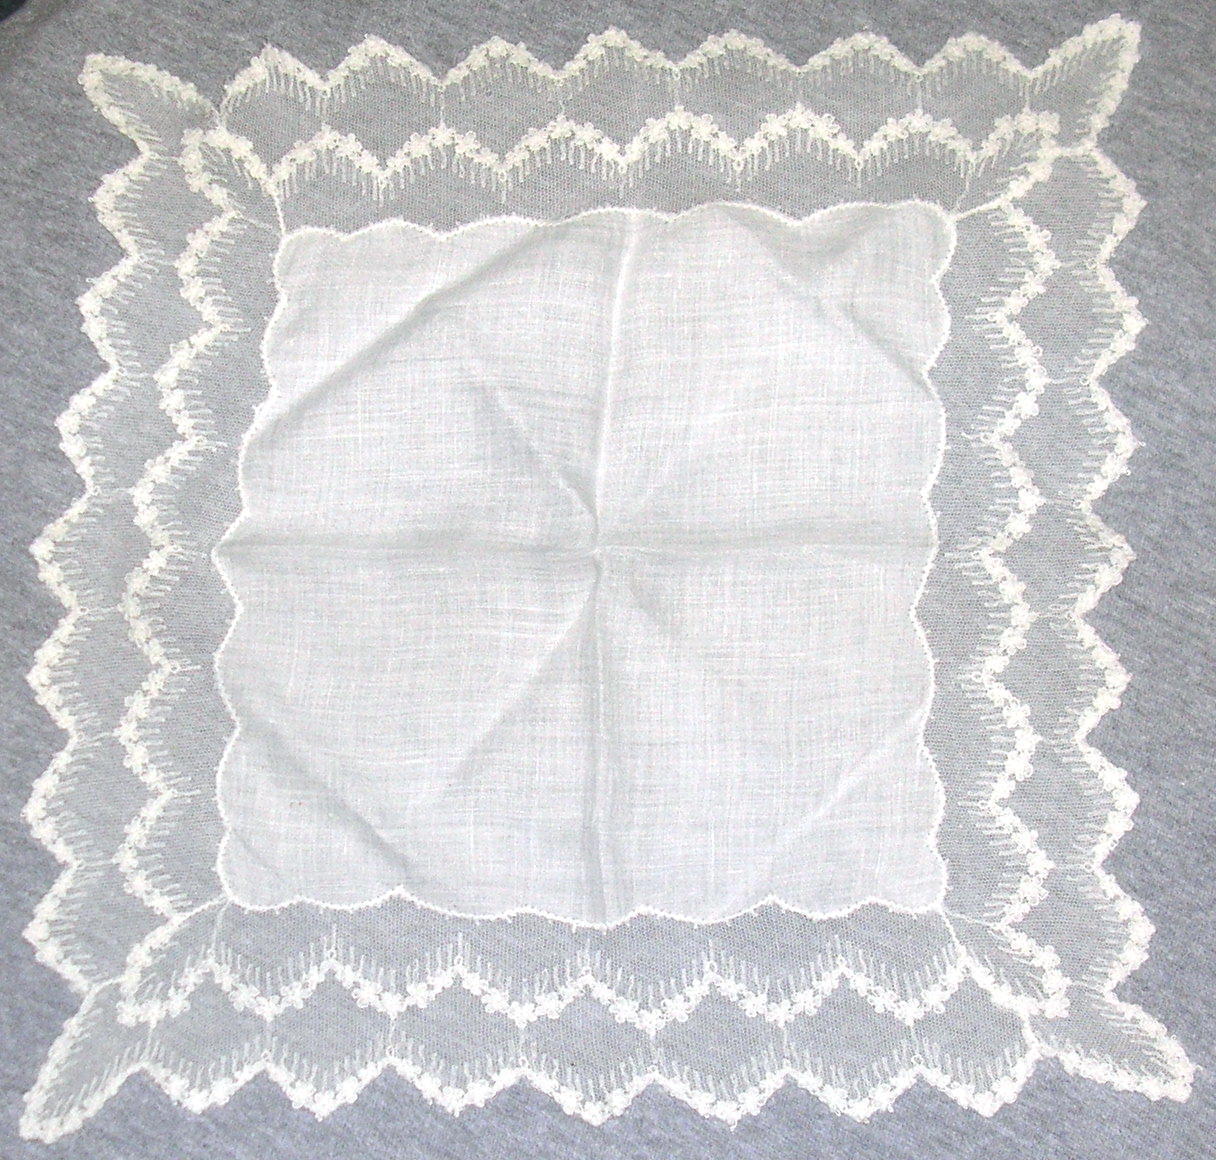 Portland Mall Outlet ☆ Free Shipping VINTAGE Needle Run Net Lace Bridal sq. White Handkerchief 12